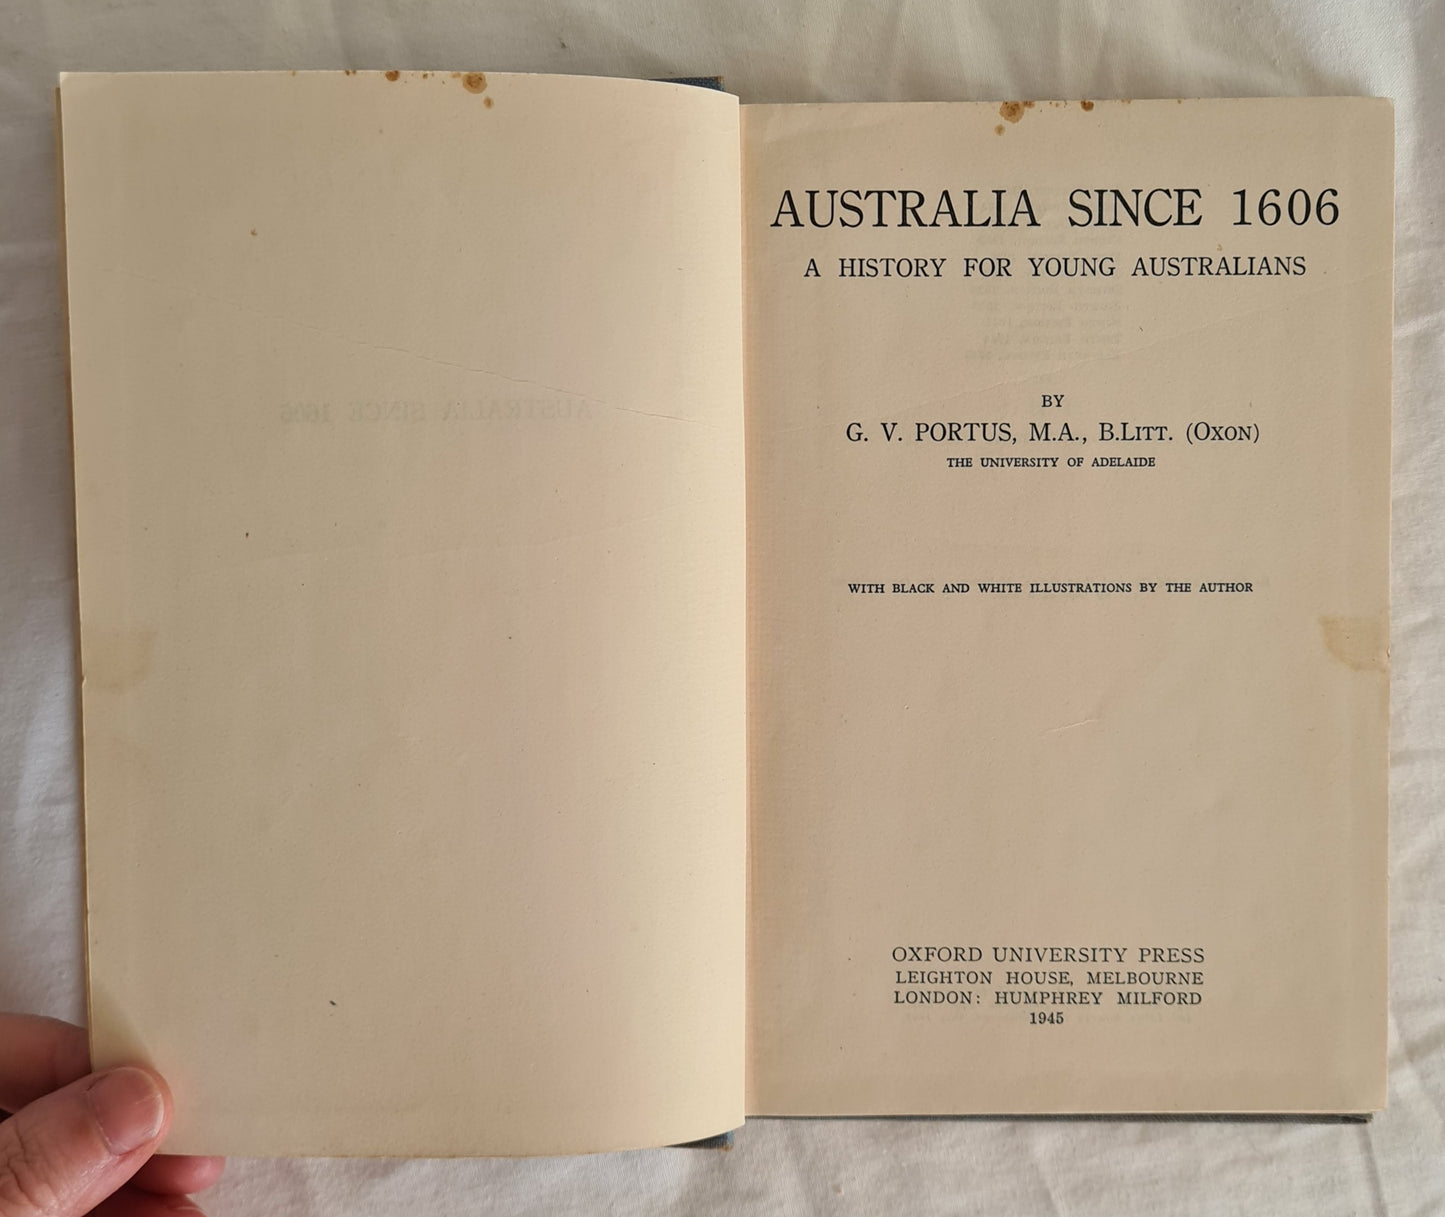 Australia Since 1606  A History for Young Australians  by G. V. Portus